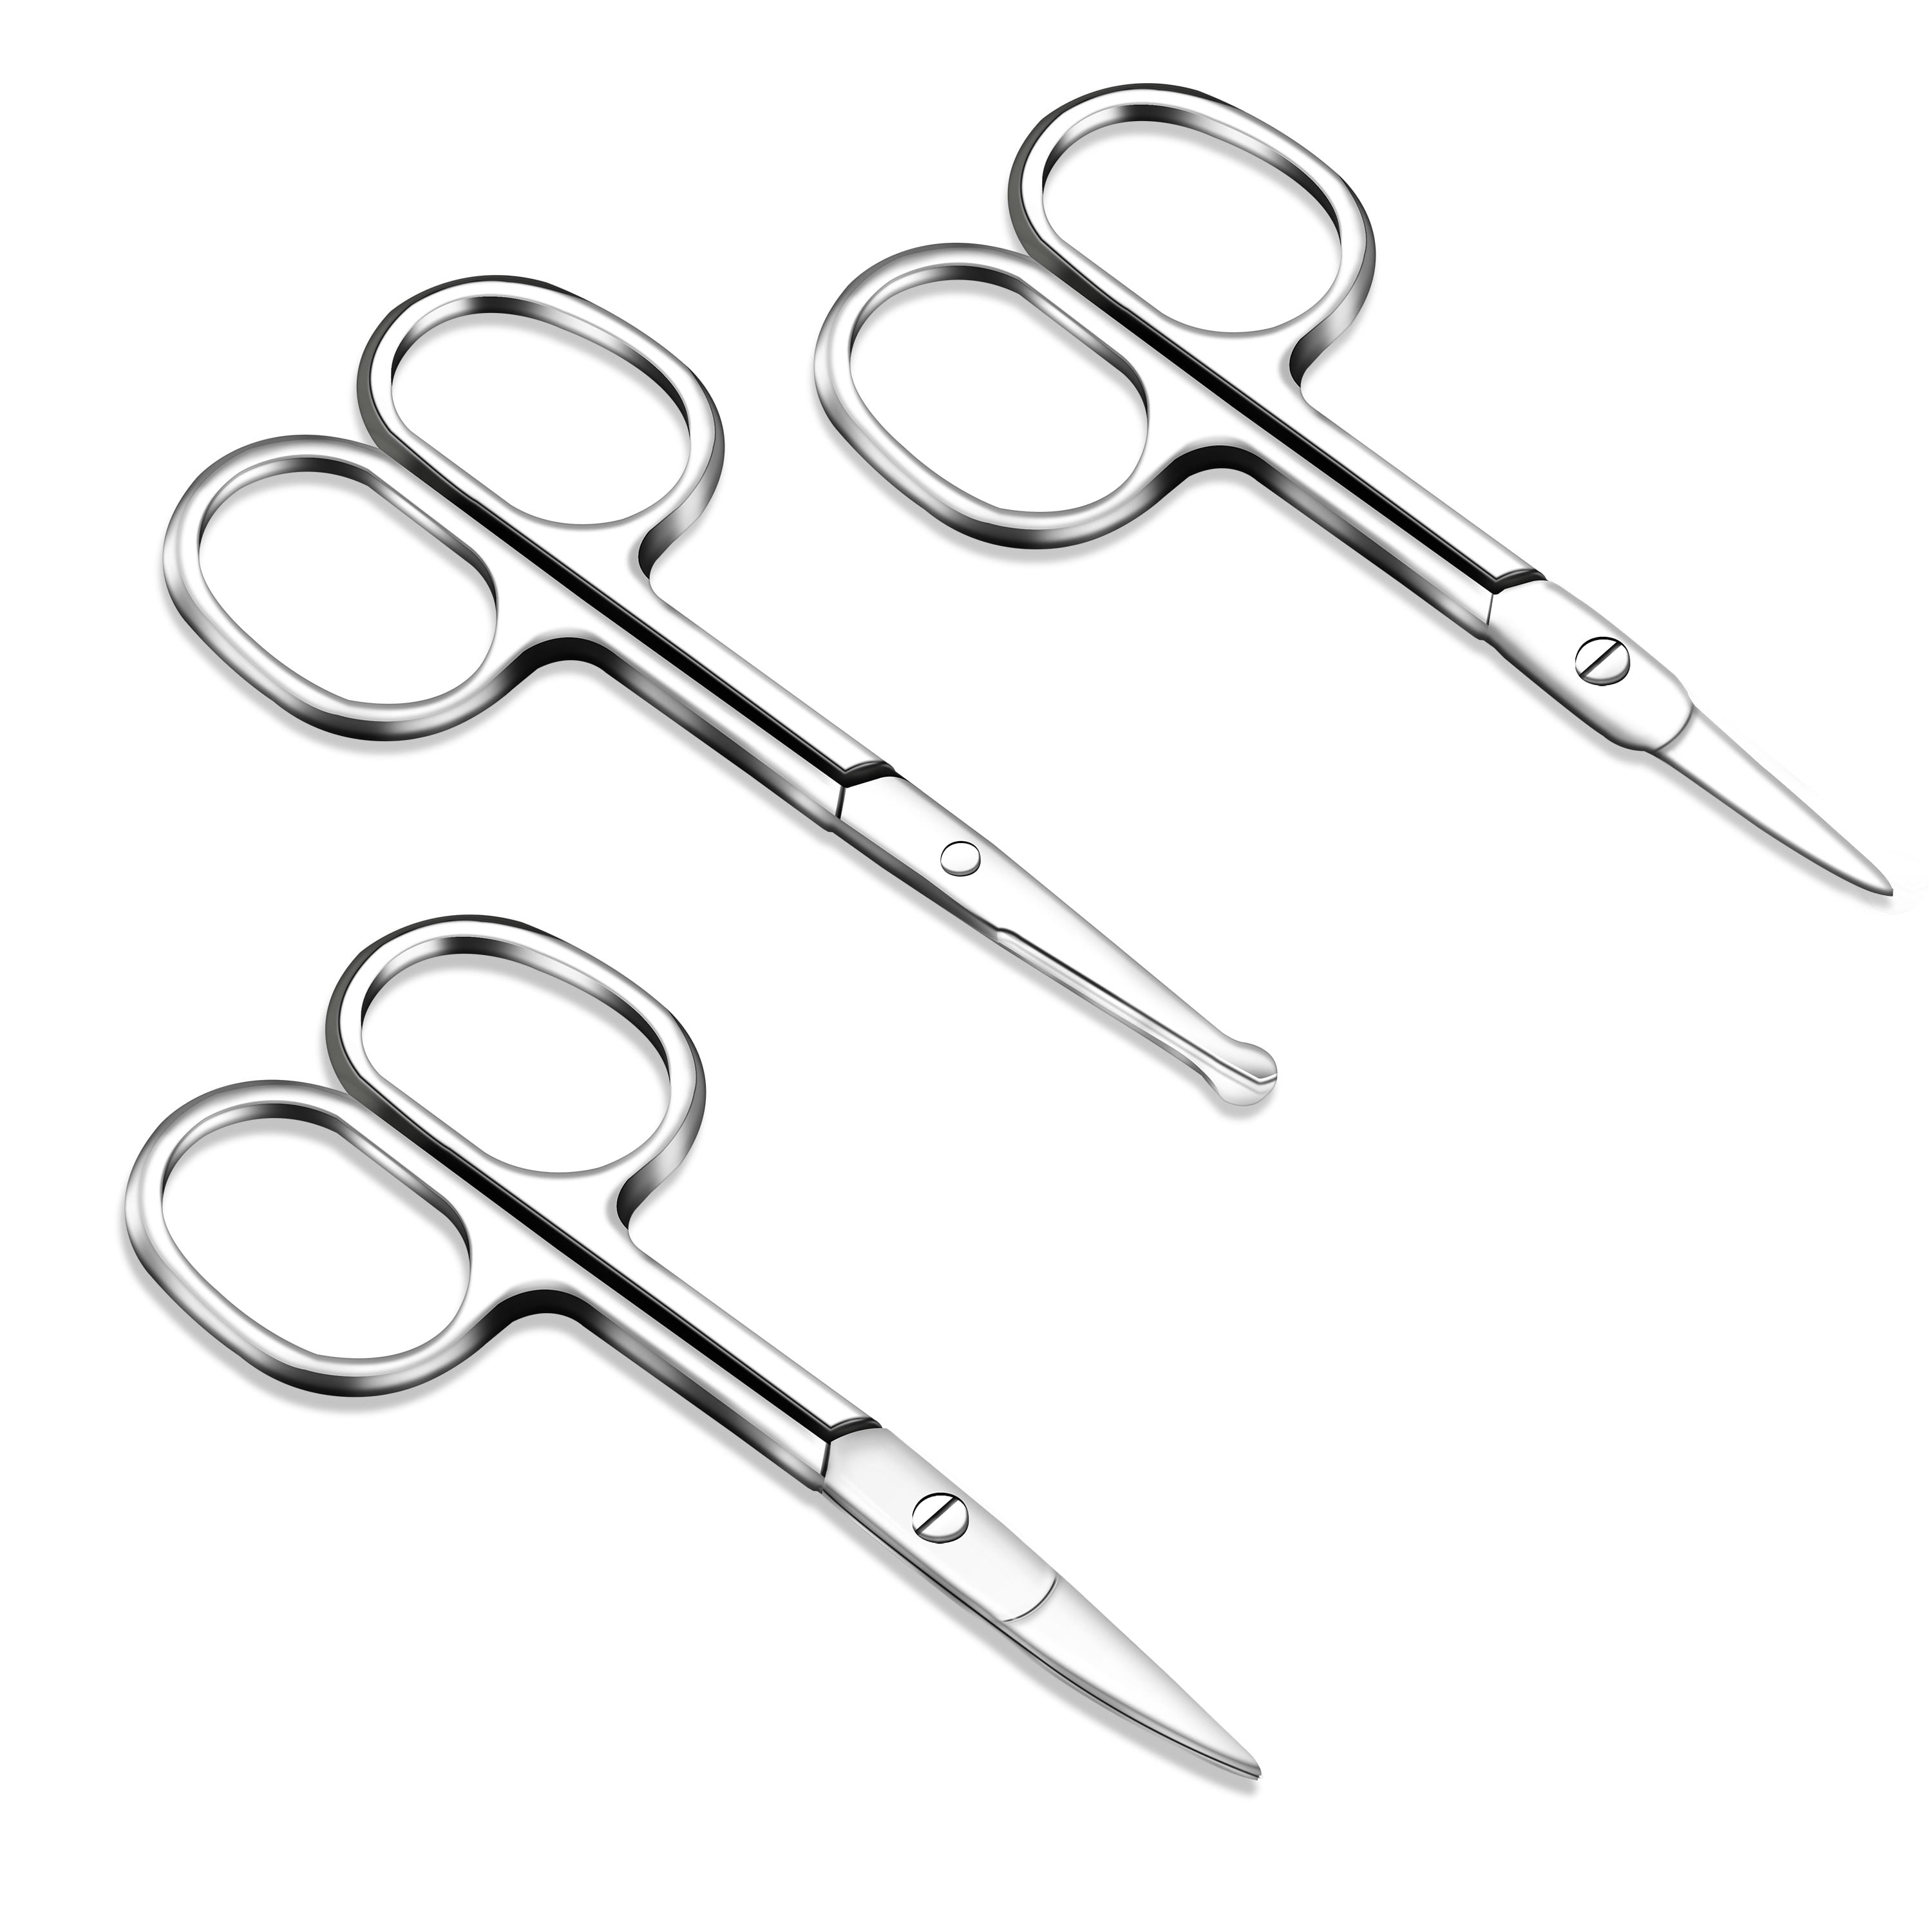 SYOSI Curved Craft Scissors, 2 Pack Small Scissors Beauty Eyebrow Scissors,  Stainless Steel Trimming Scissors for Eyebrow Eyelash Extensions, Facial  Nose Hair (4 Inch) UAE